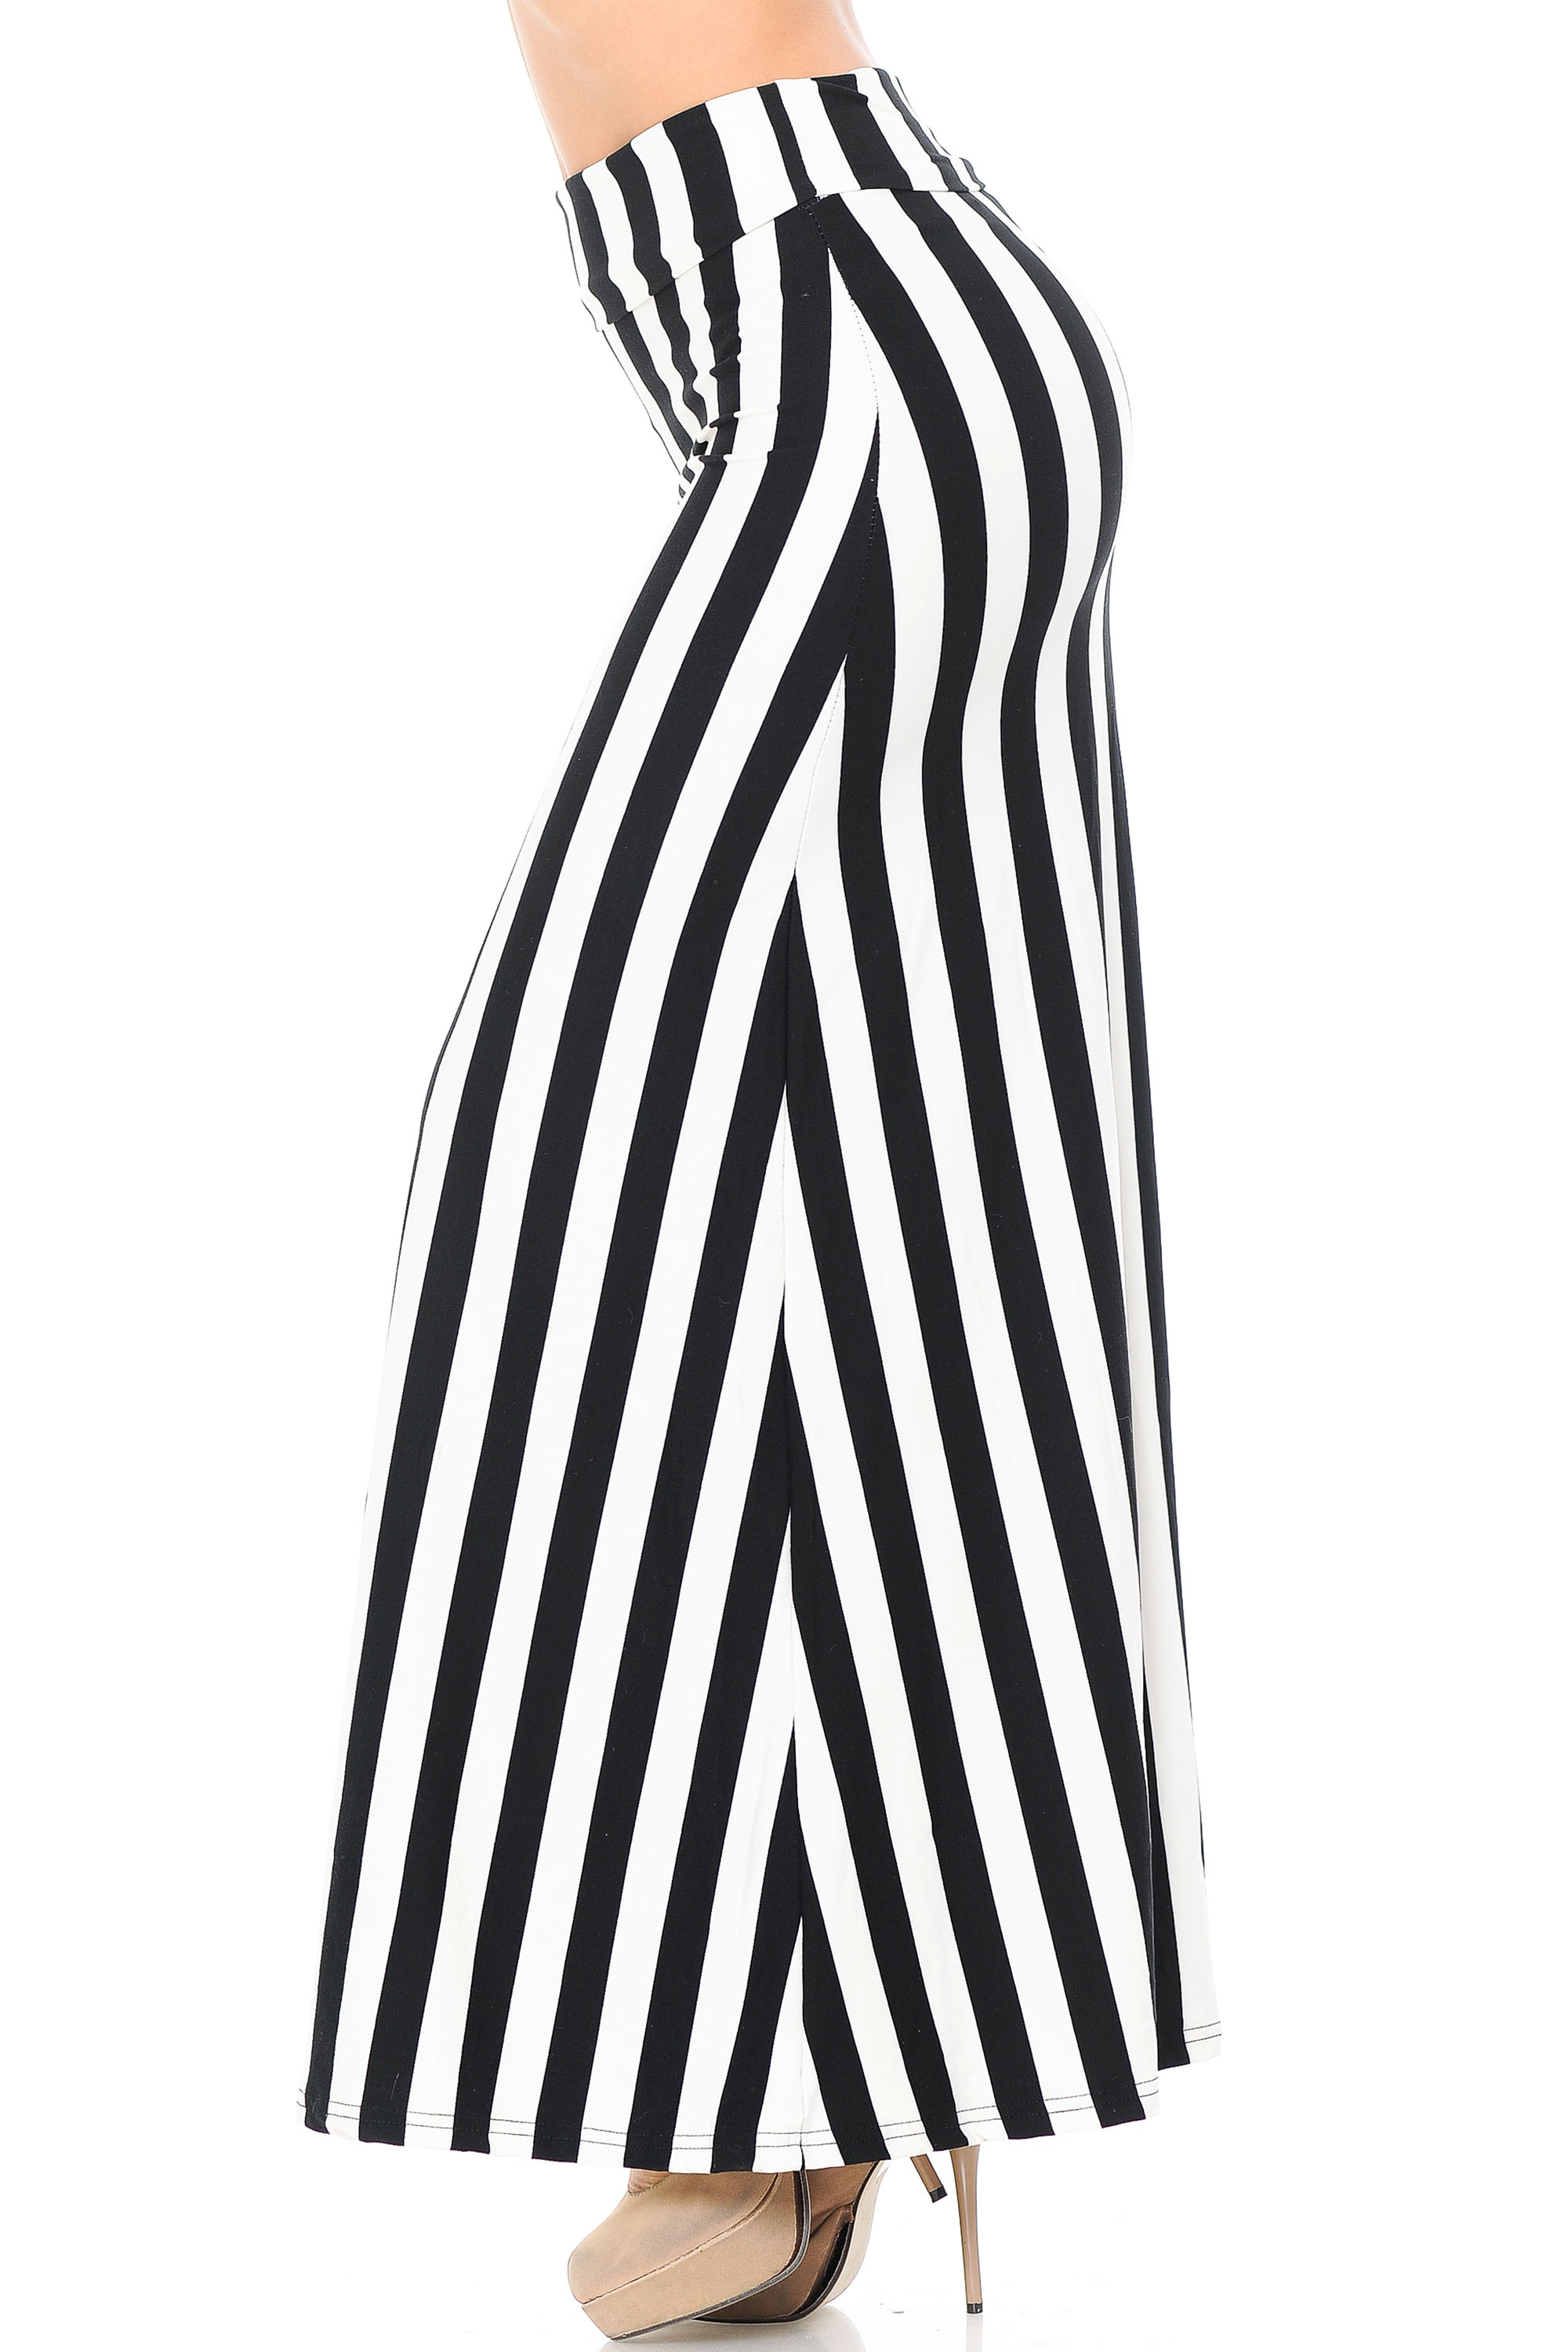 Wholesale Buttery Smooth Black and White Wide Stripe Plus Size Maxi Skirt